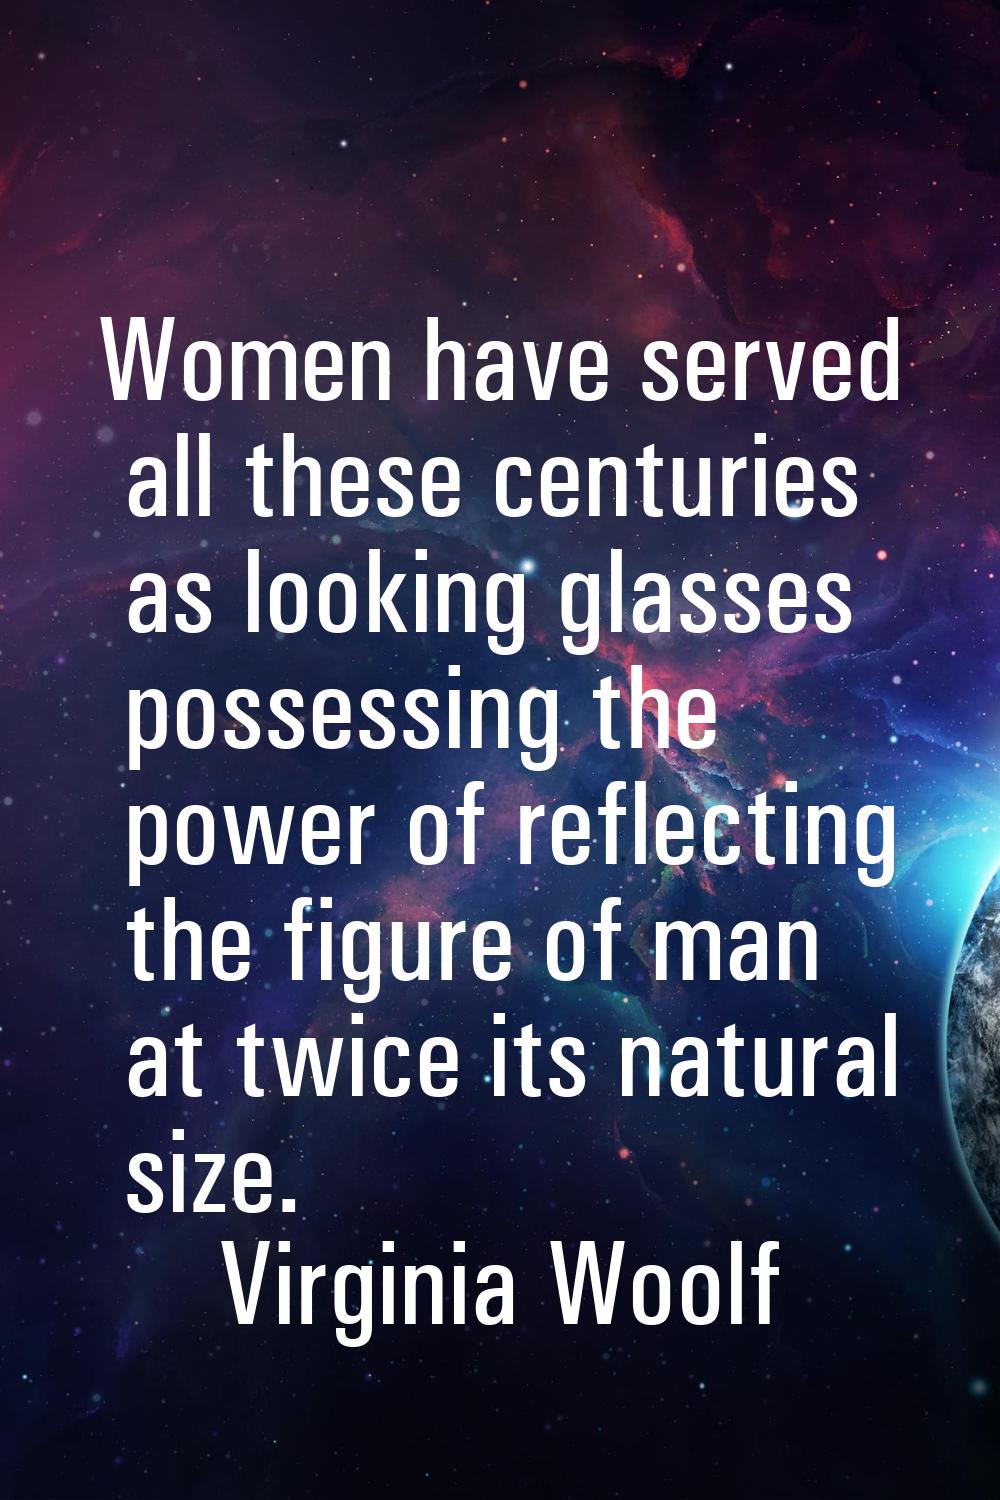 Women have served all these centuries as looking glasses possessing the power of reflecting the fig